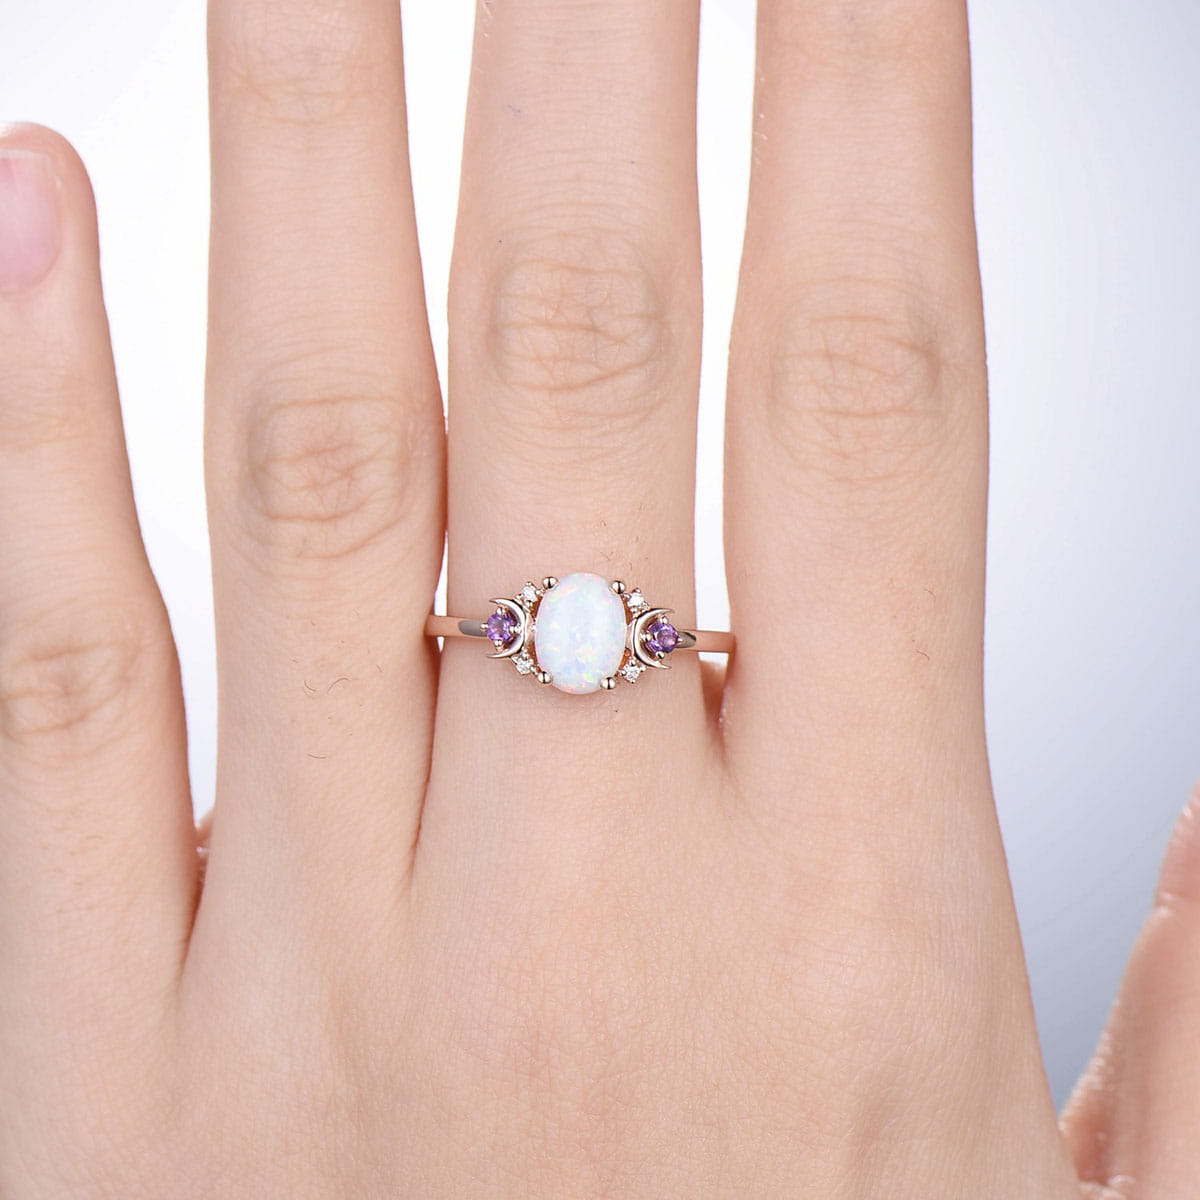 Vintage Opal Engagement Ring Rose Gold Unique Nature Inspired Moon Amethyst Ring Unique Alternative October birthstone Wedding Ring Women - PENFINE